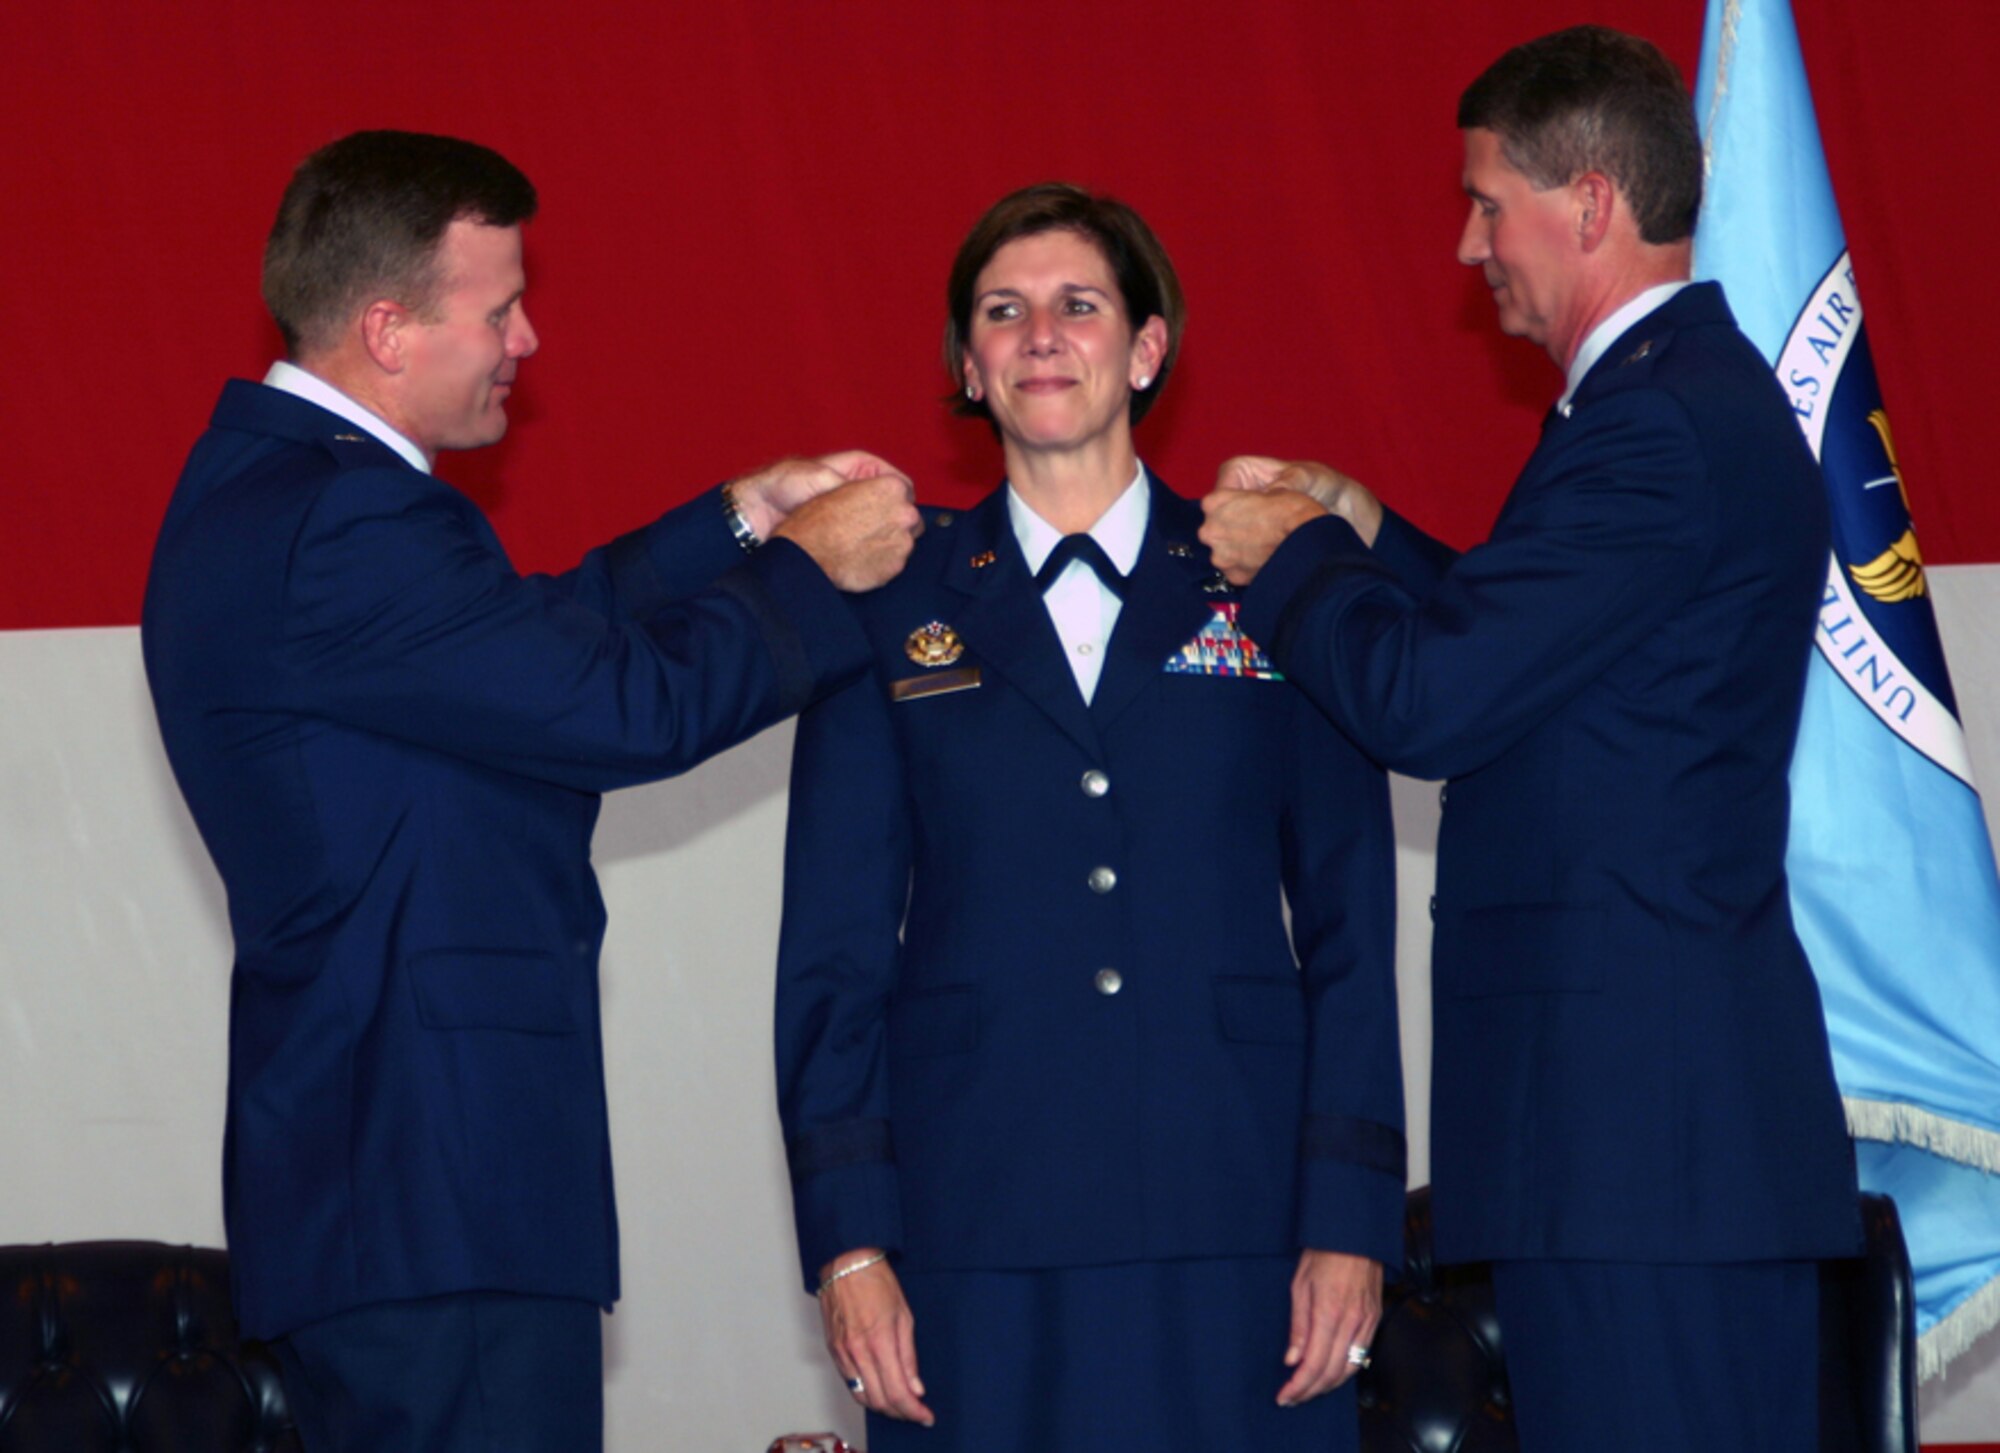 Col. Lori J. Robinson, commander of the 552nd Air Control Wing, receives her brigadier general stars pinned on by Brig. Gen. Tod Wolters (left), commander of the 325th Fighter Wing at Tyndall Air Force Base, Fla., and her husband, Maj. Gen. David Robinson, Mobilization Assistant to the Chief of the Air Force Reserves, during a brevet ceremony in Dock 2 on Sept. 21. (Photo by Senior Airman Lorraine Amaro)